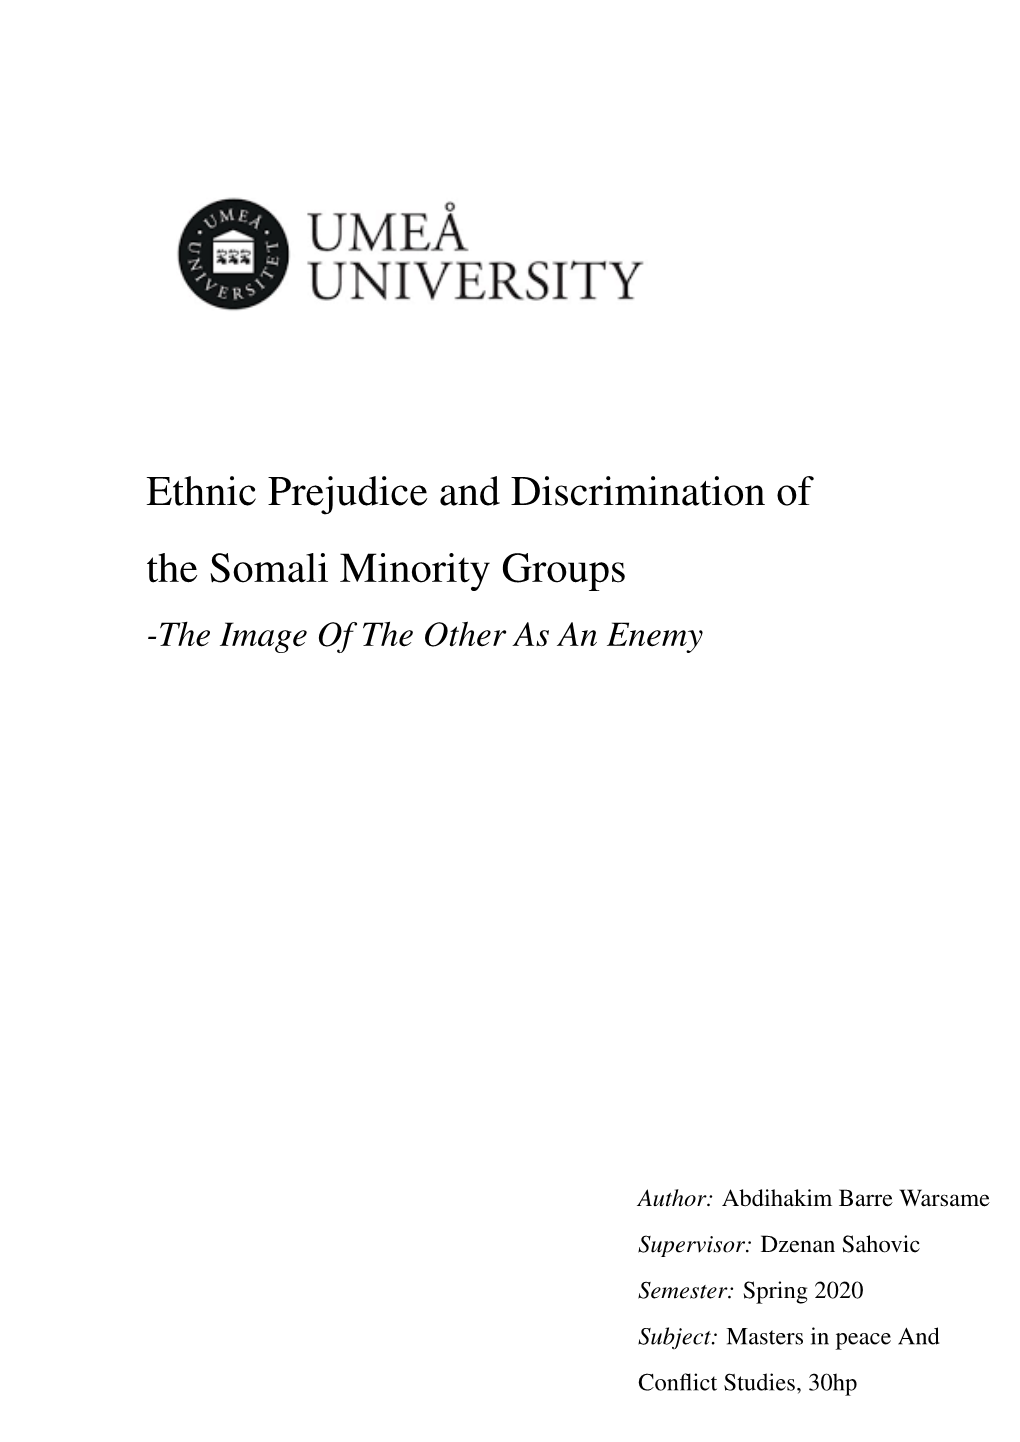 Ethnic Prejudice and Discrimination of the Somali Minority Groups -The Image of the Other As an Enemy